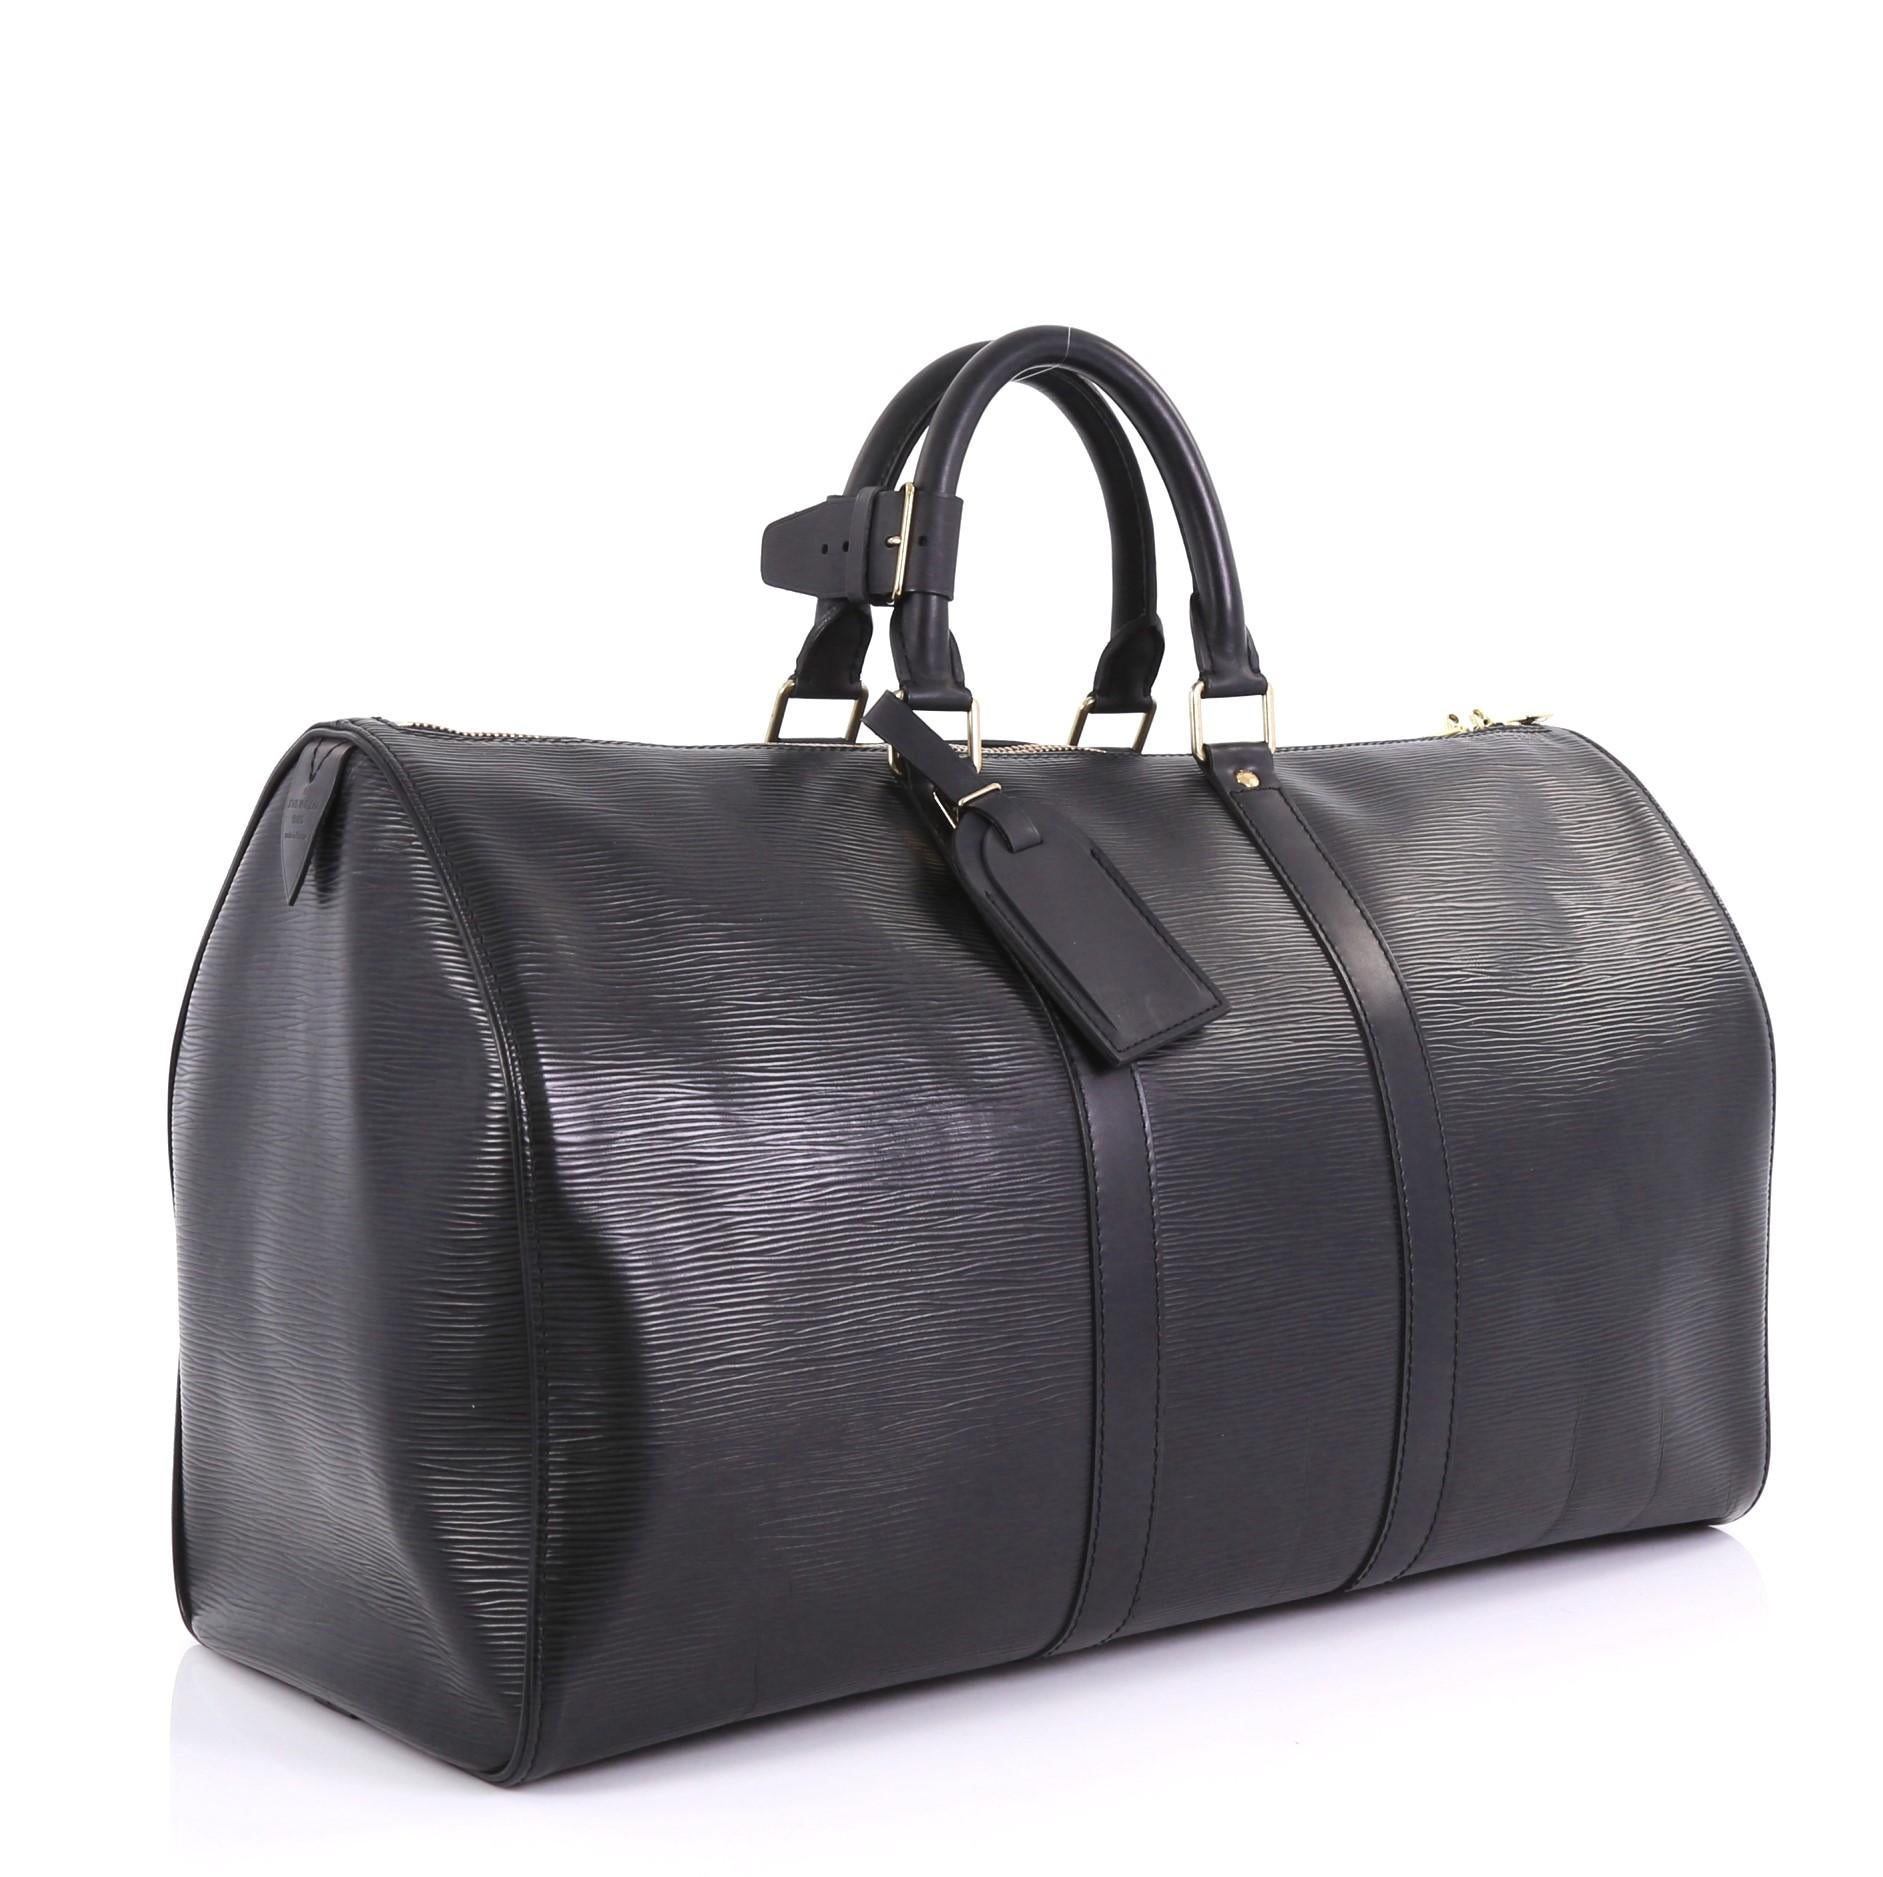 This Louis Vuitton Keepall Bag Epi Leather 45, crafted from black epi leather, features dual rolled handles, subtle LV logo, and gold-tone hardware. Its zip closure opens to a black raw leather interior. Authenticity code reads: SP0034. 

Estimated